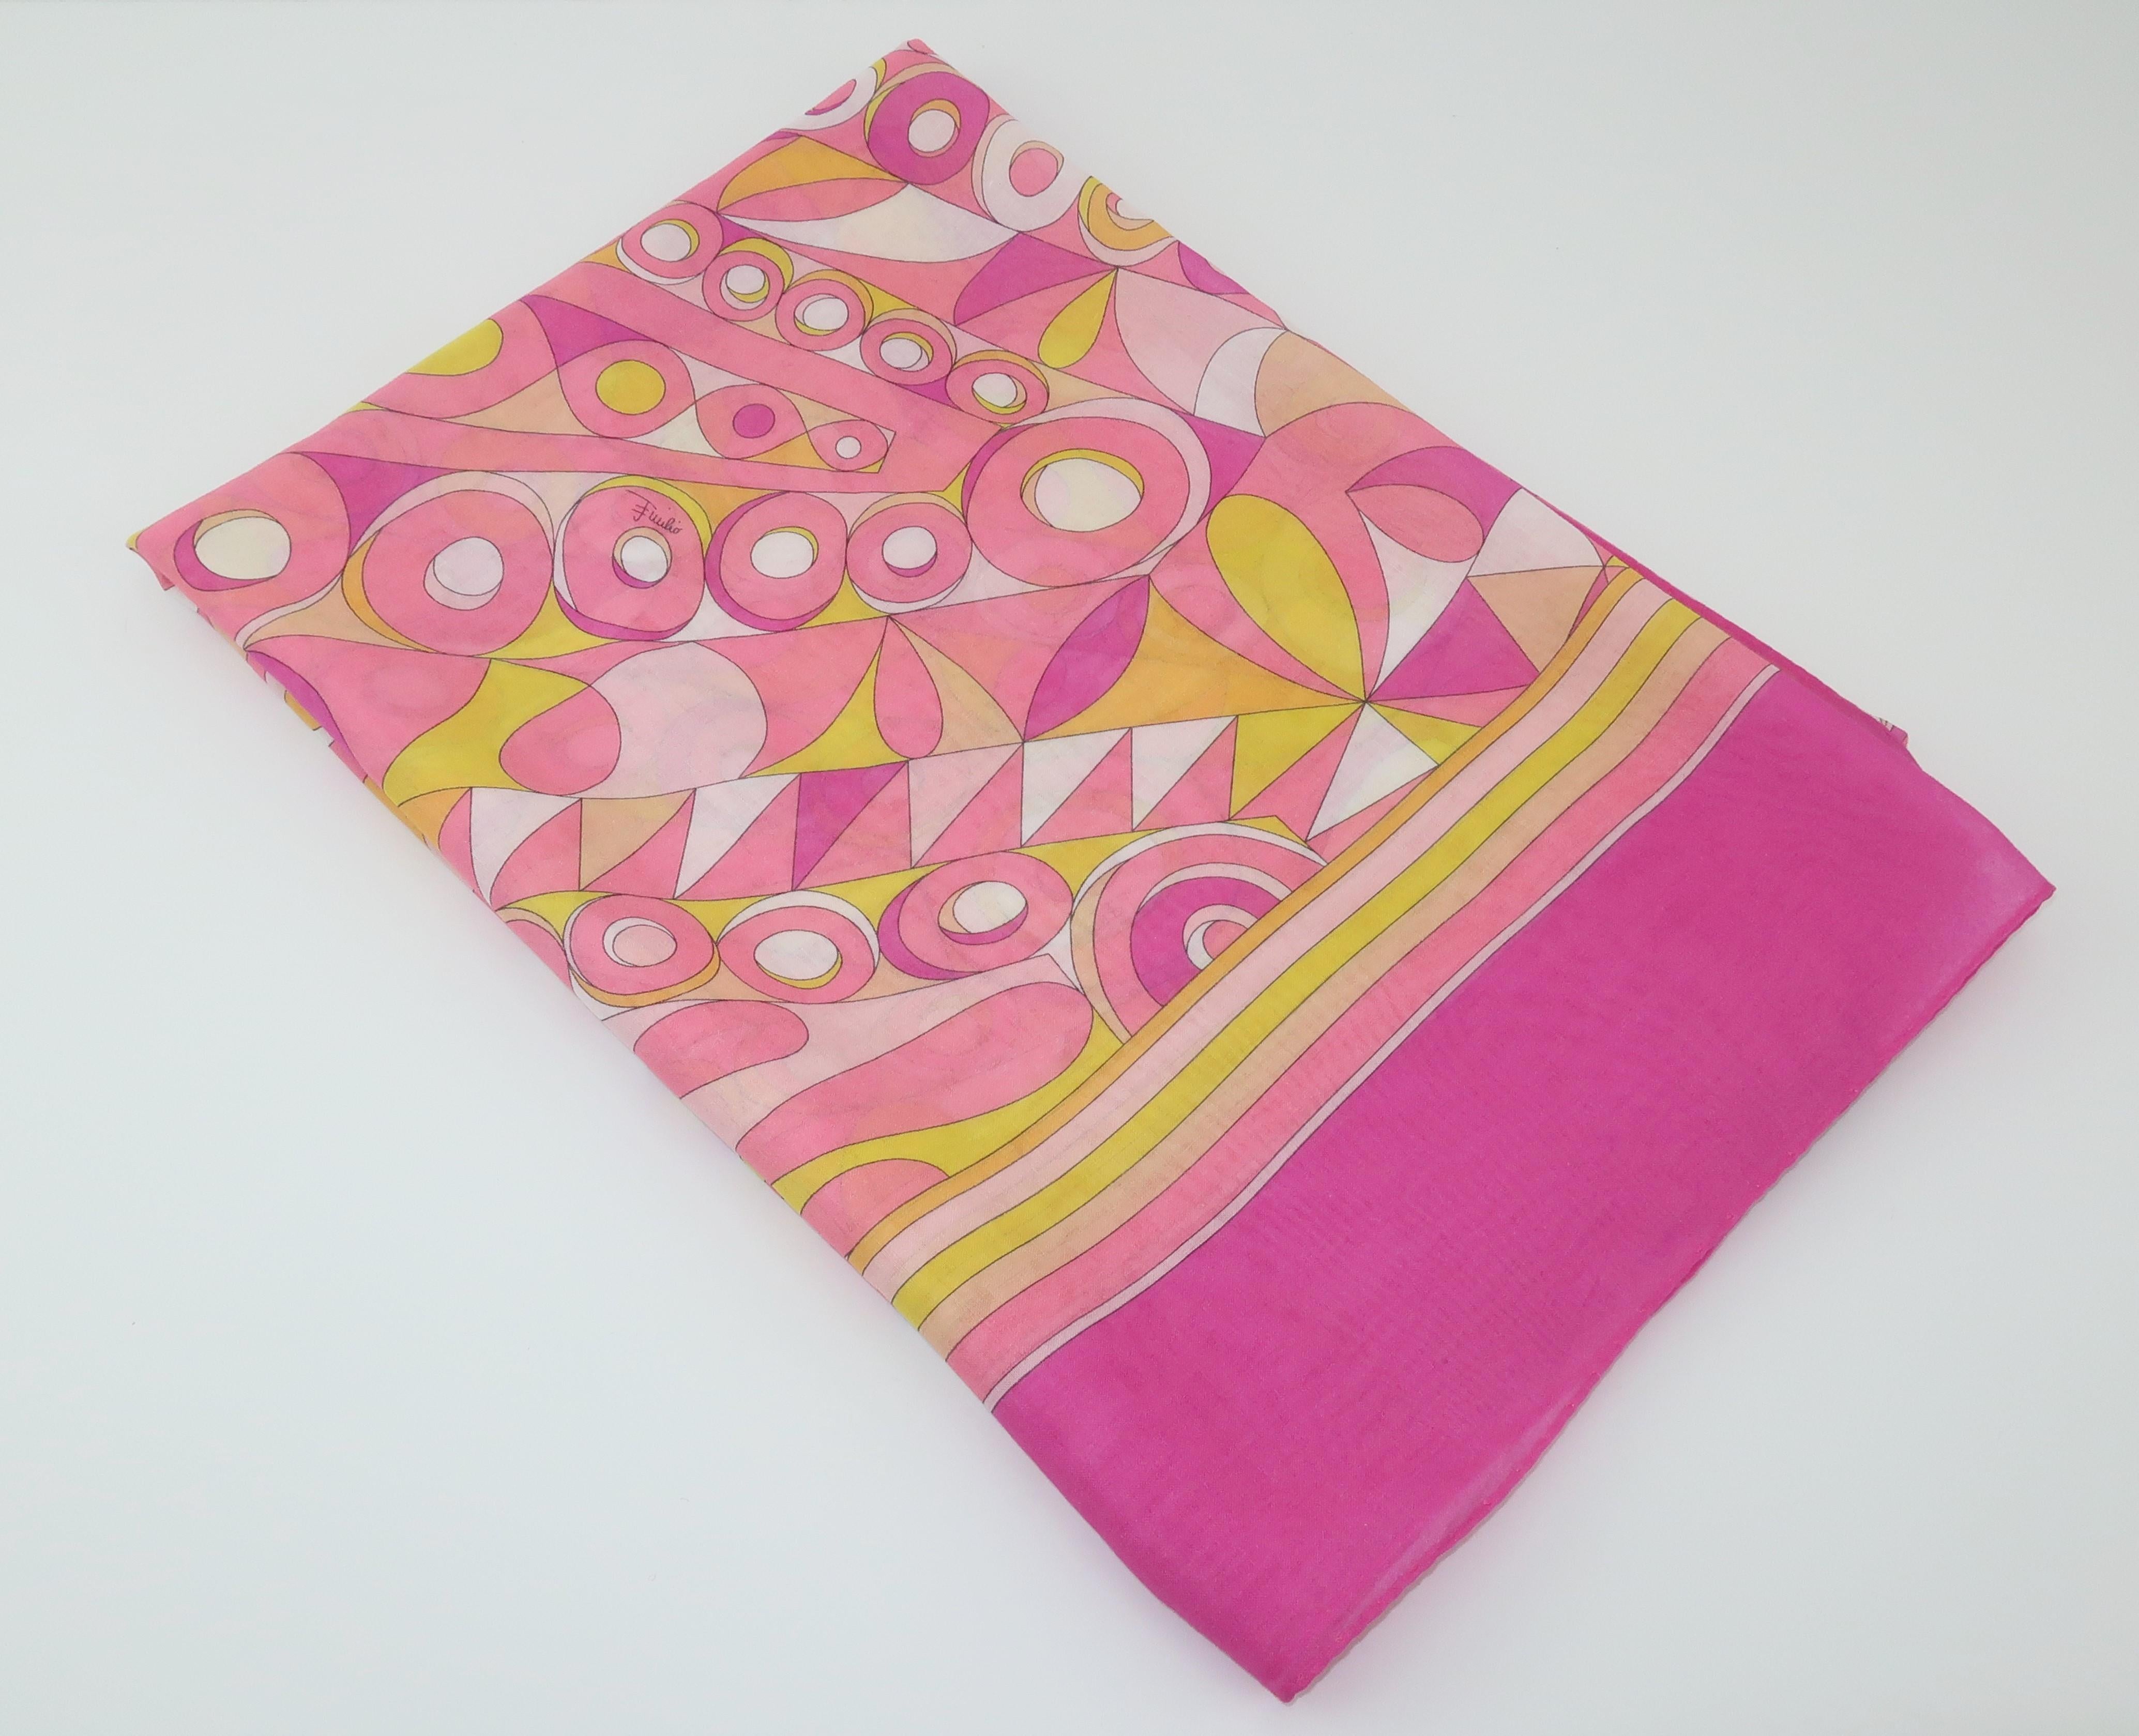 Perfect for warmer weather and sultry days at the beach! This fine muslin cotton Emilio Pucci scarf is both long and lightweight enough to wrap and drape to your heart's content. It is a classic mod psychedelic print in shades of hot pink, pale